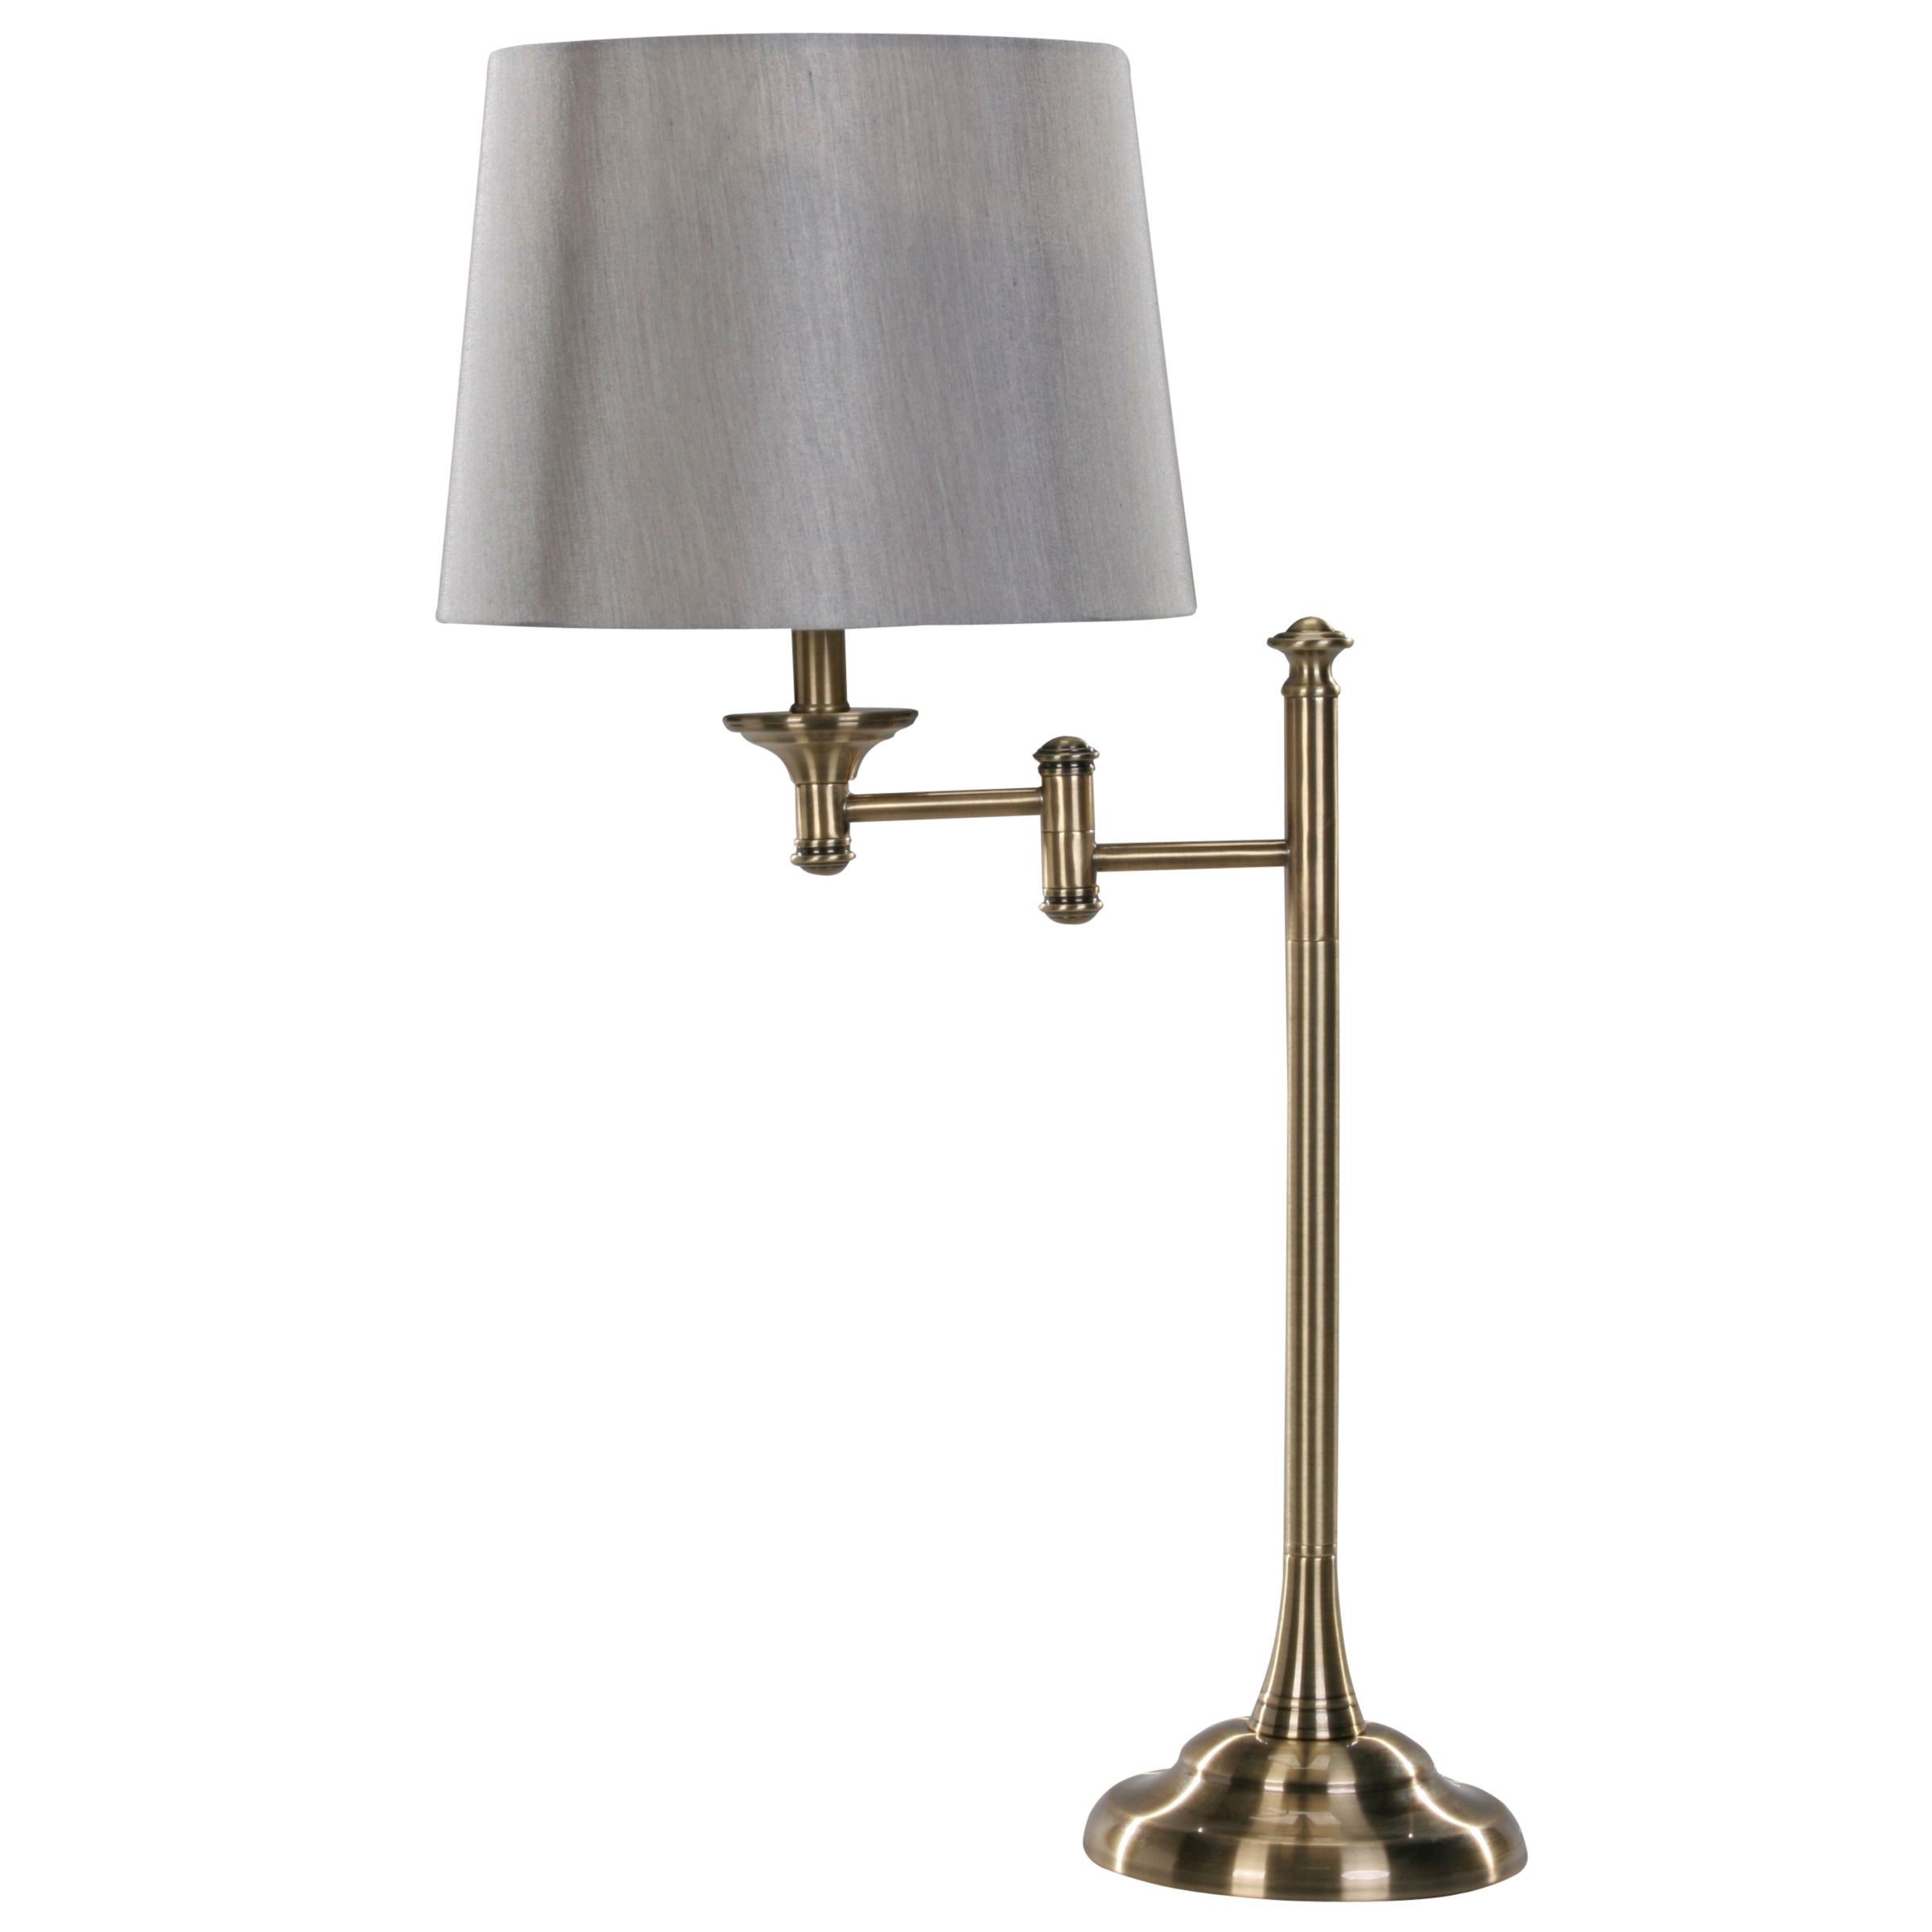 Dominic Table Lamp, Brass